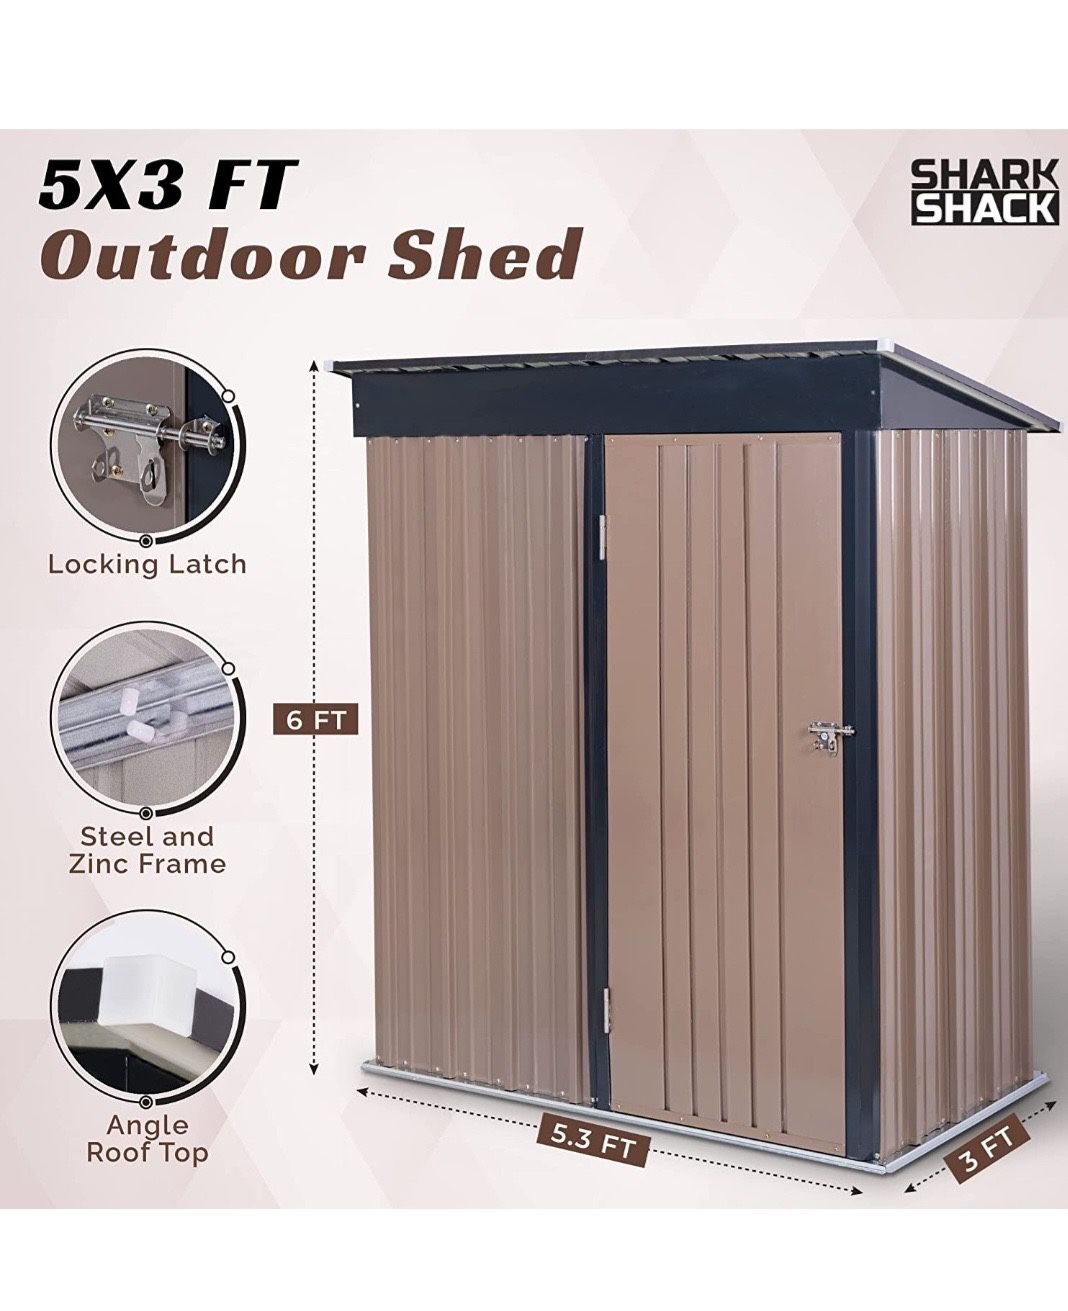 Brand New Outdoor Anti-Rust Steel Shed 6ftx5.3ftx3ft